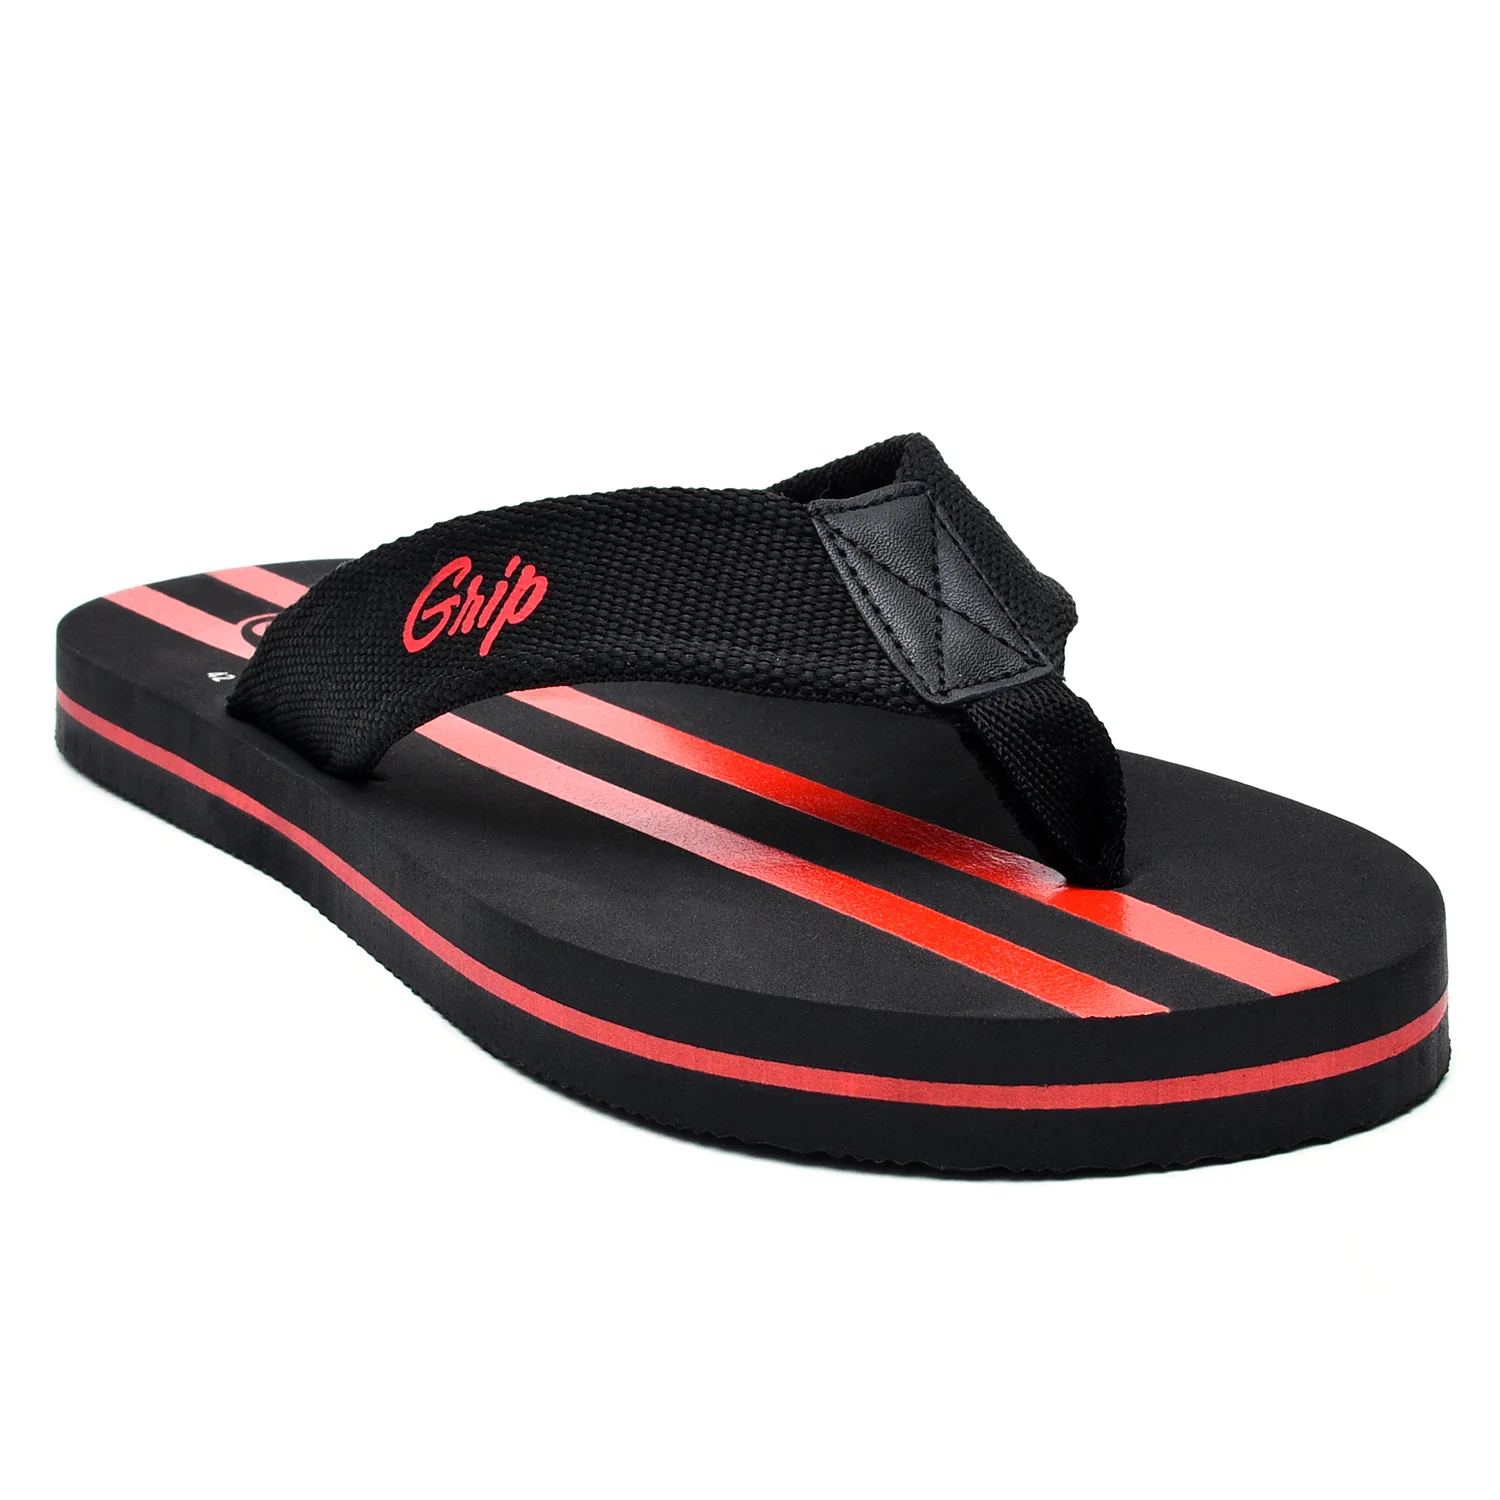 a black and red striped sandal